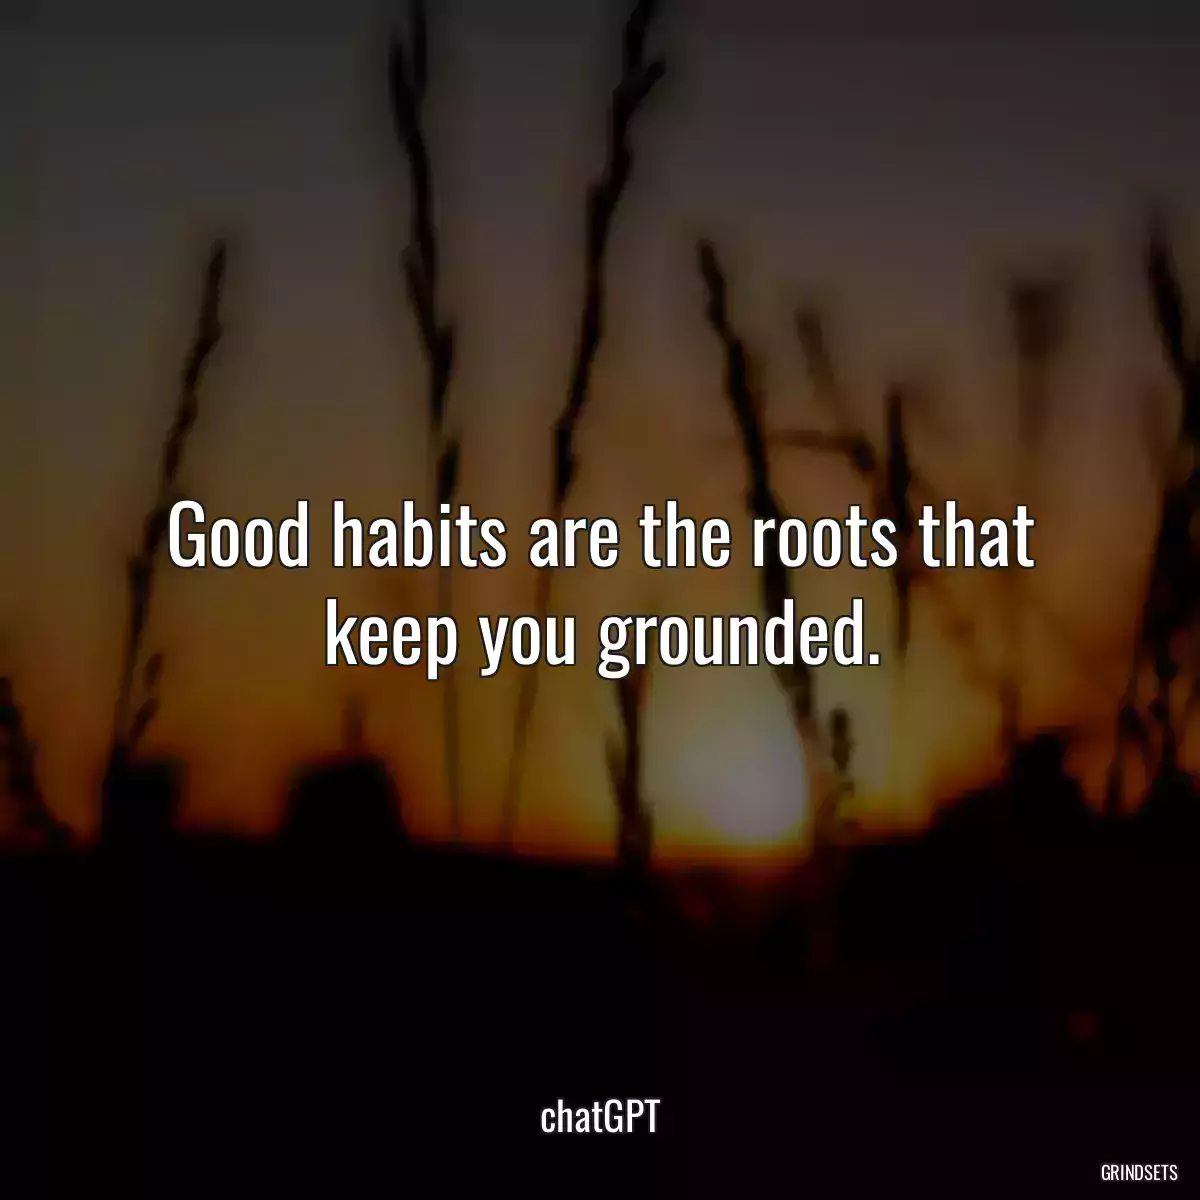 Good habits are the roots that keep you grounded.